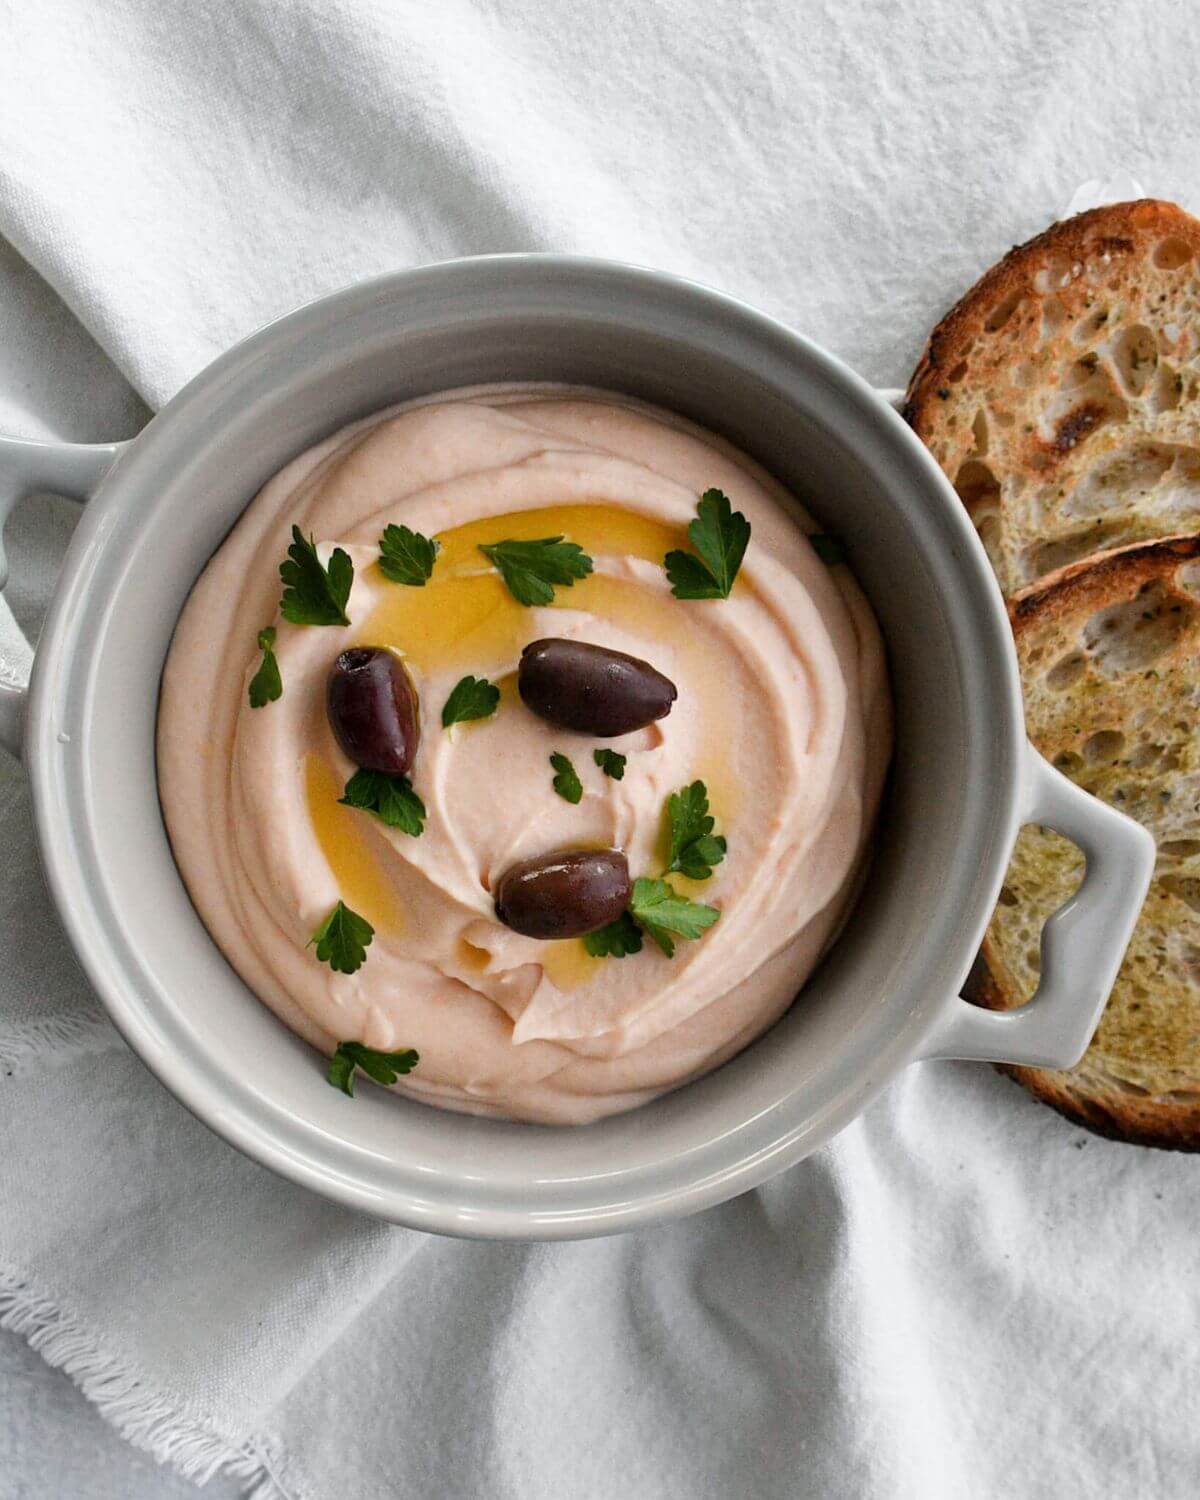 taramasalata dip in a light grey bowl topped with olive oil, parsley, and olives.